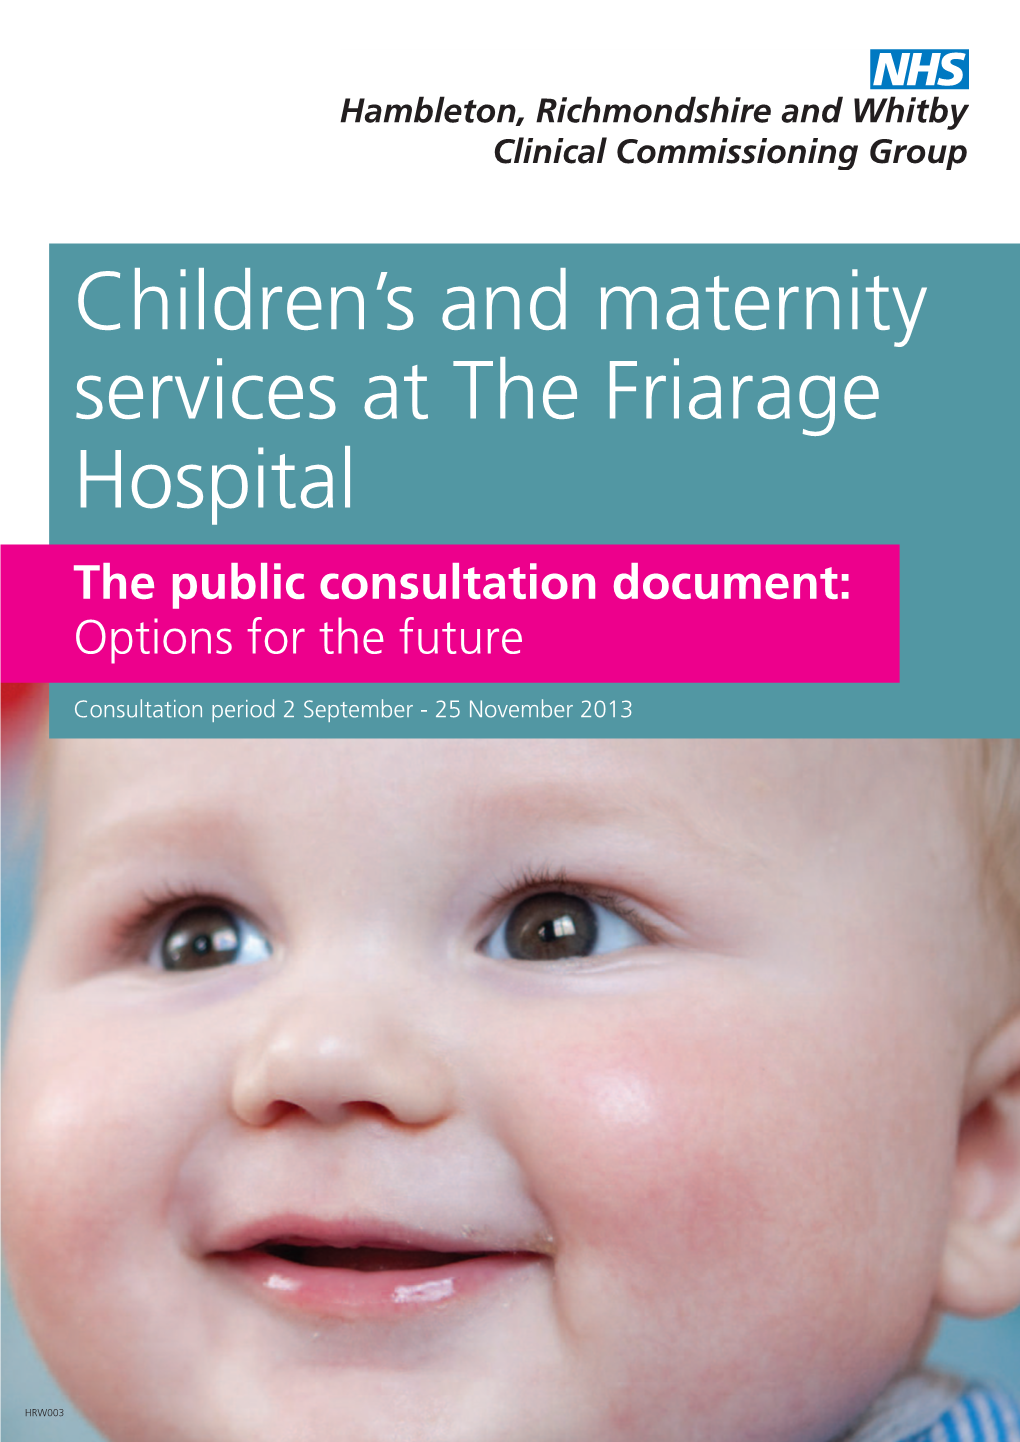 Children's and Maternity Services at the Friarage Hospital